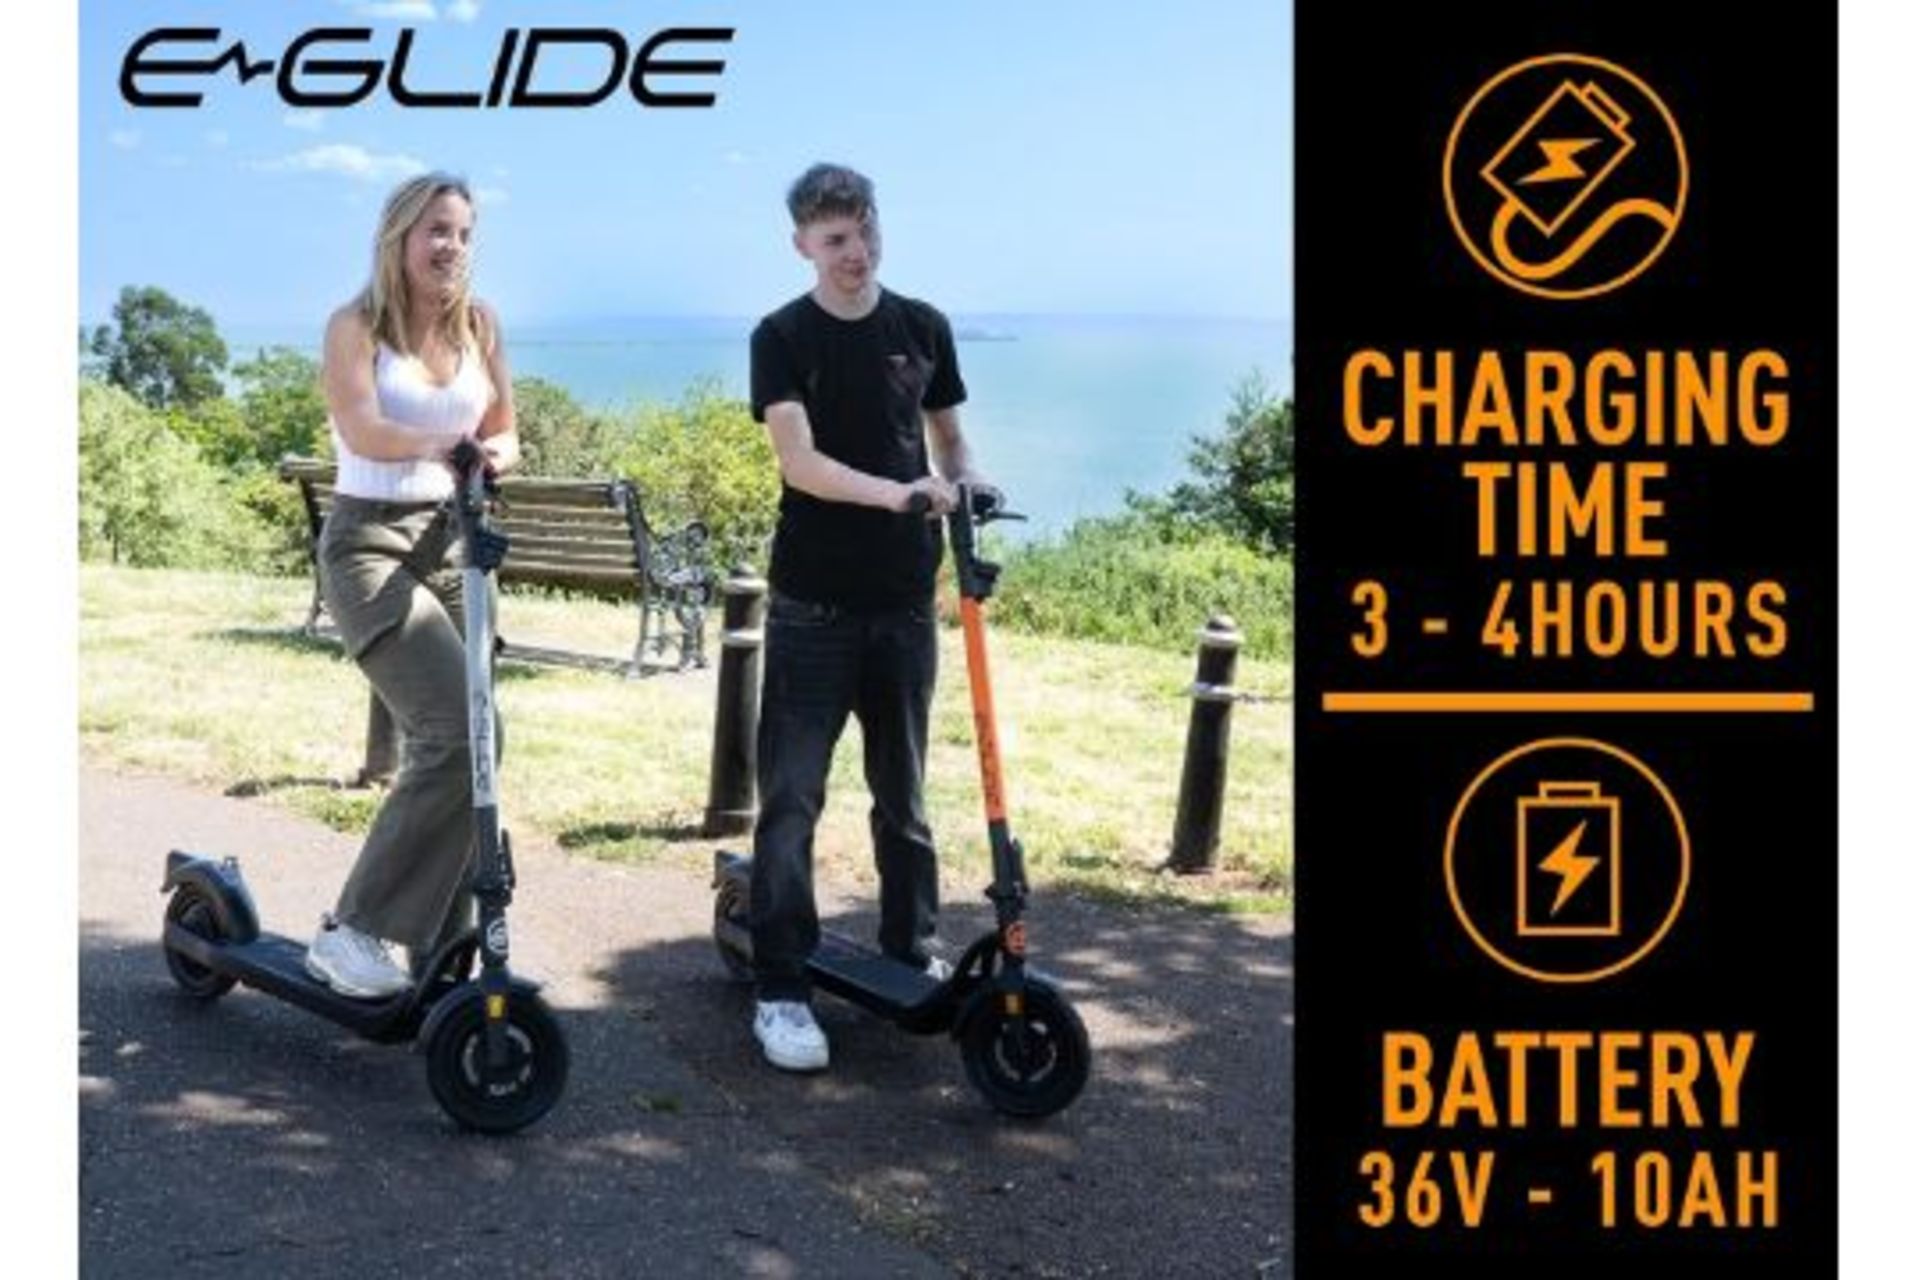 Brand New E-Glide V2 Electric Scooter Grey and Black RRP £599, Introducing a sleek and efficient - Image 4 of 5